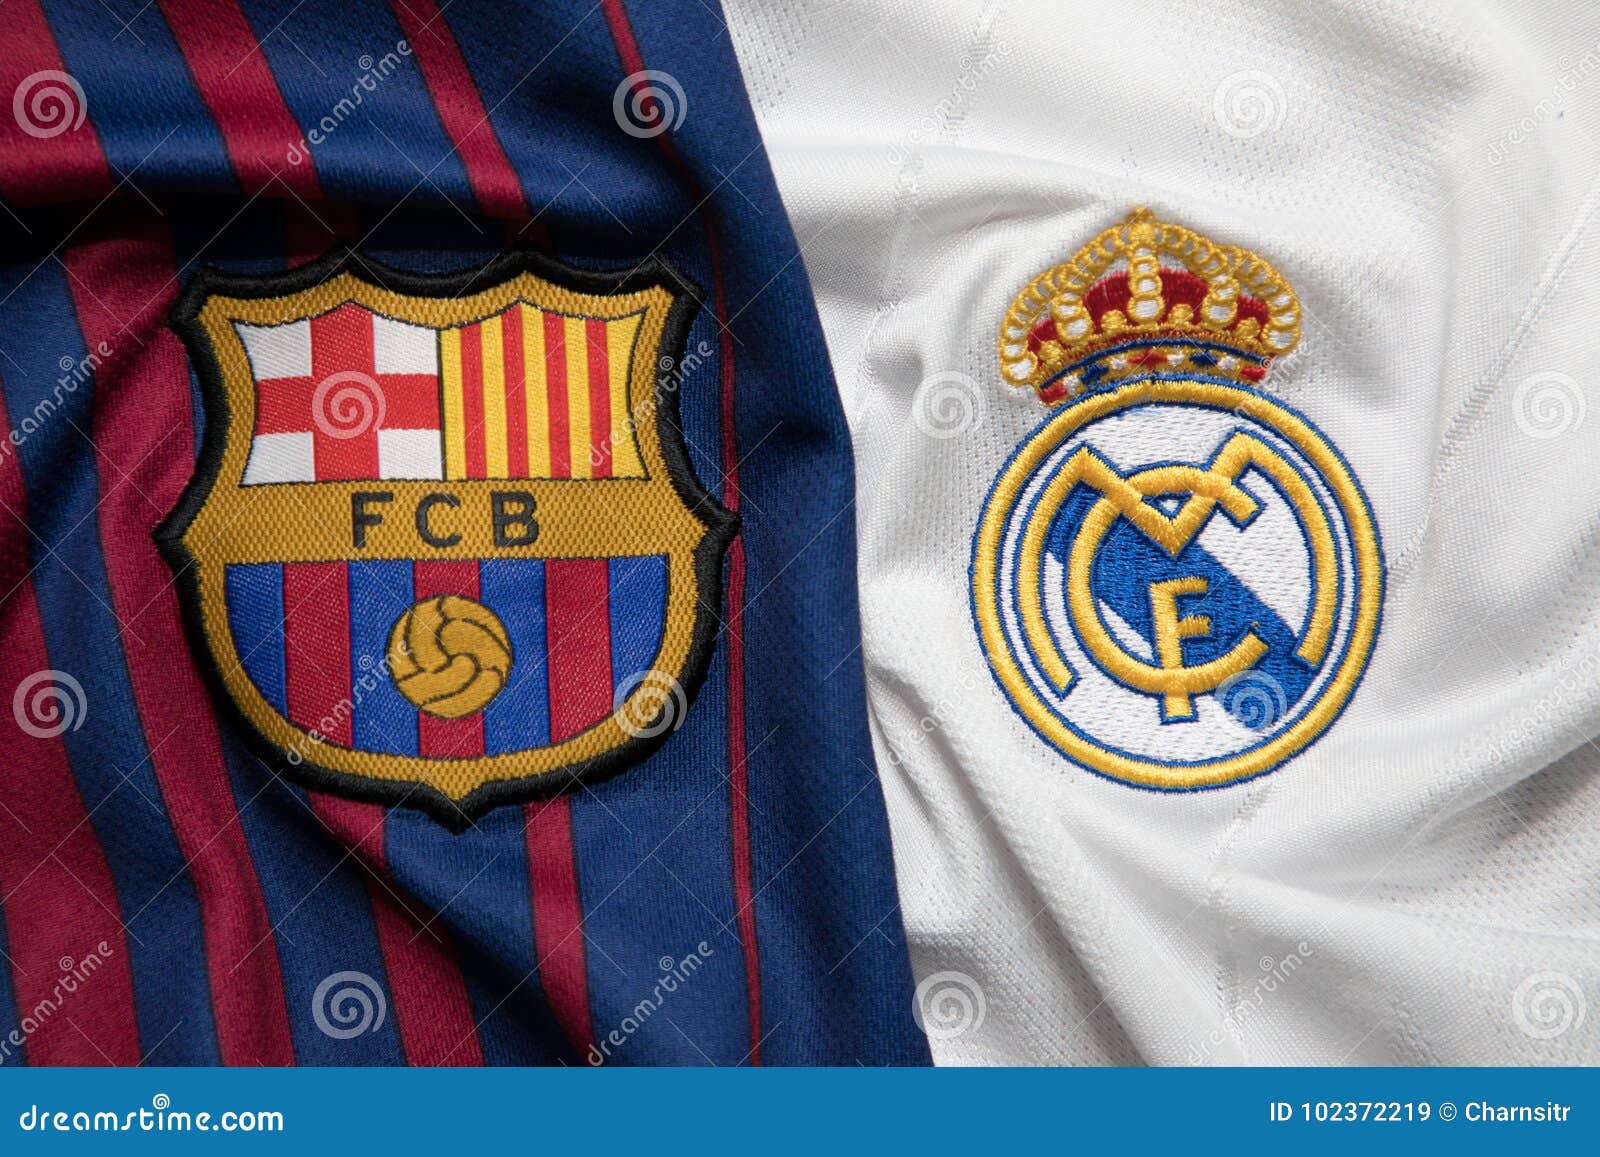 Madrid Football Mania Shopping Editorial Image - Image of famous, ball:  64002120